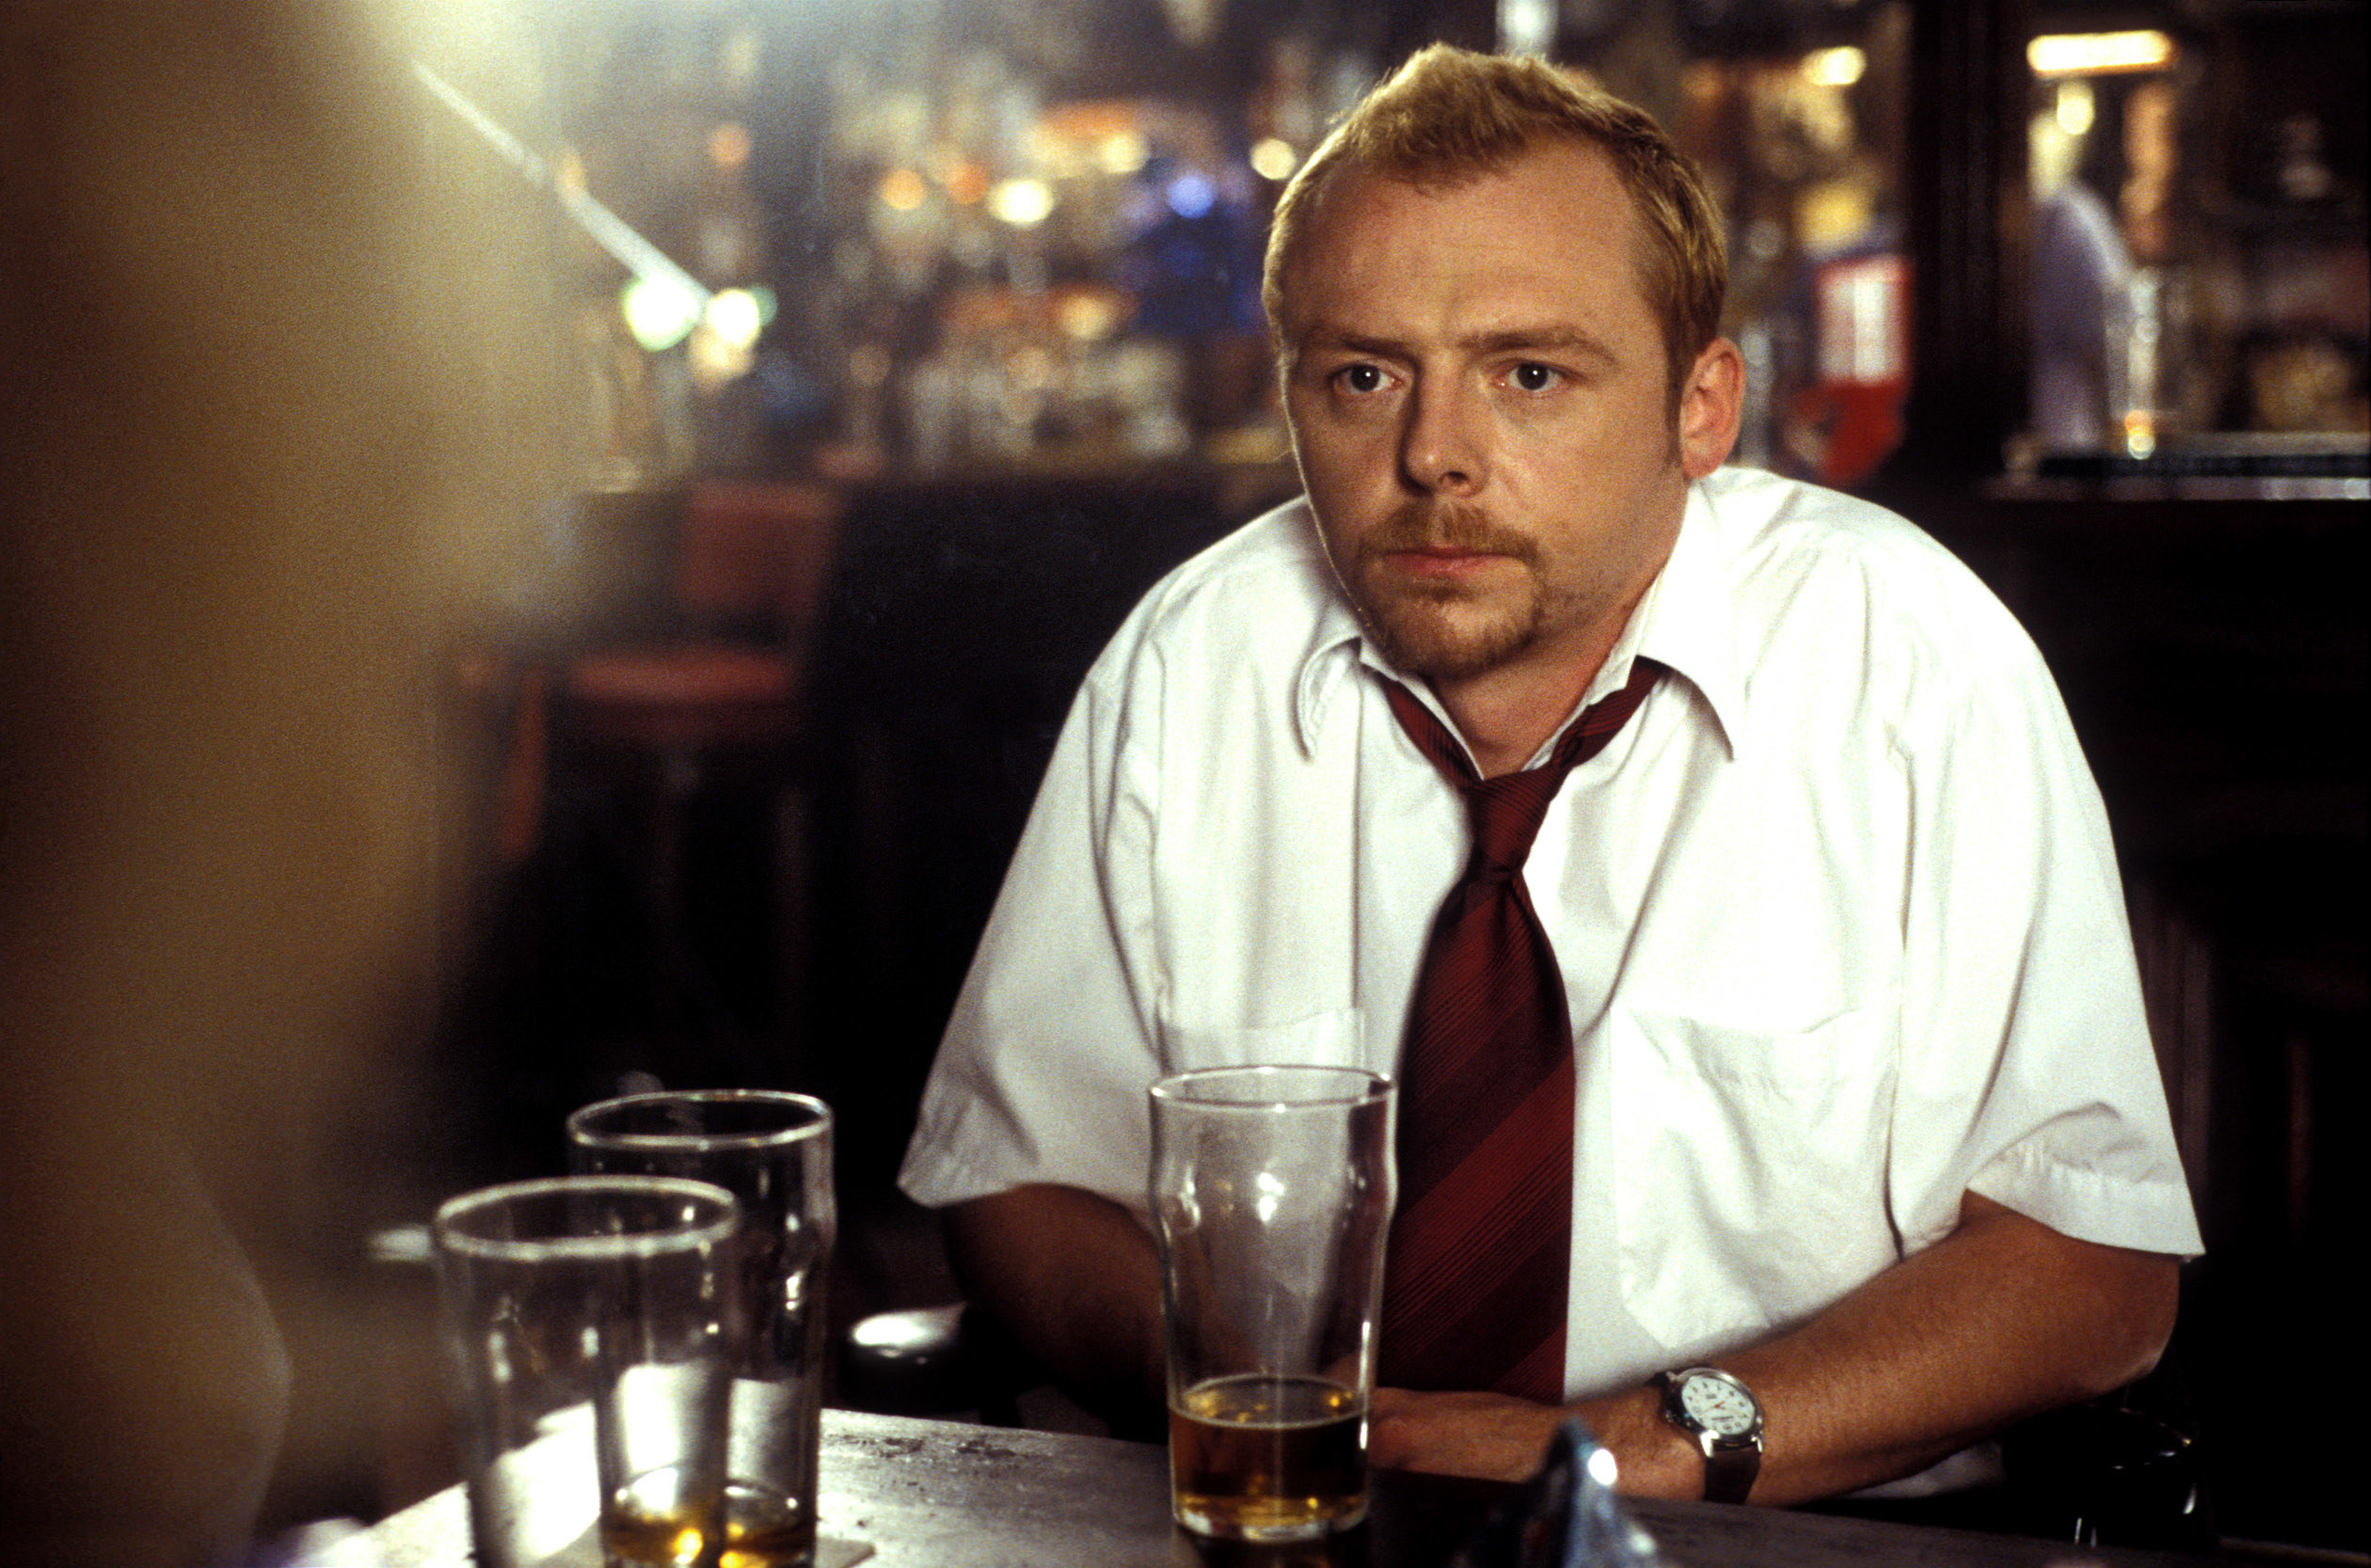 Simon Pegg in a shirt and tie, sitting dejected in a pub with a nearly empty pint of beer